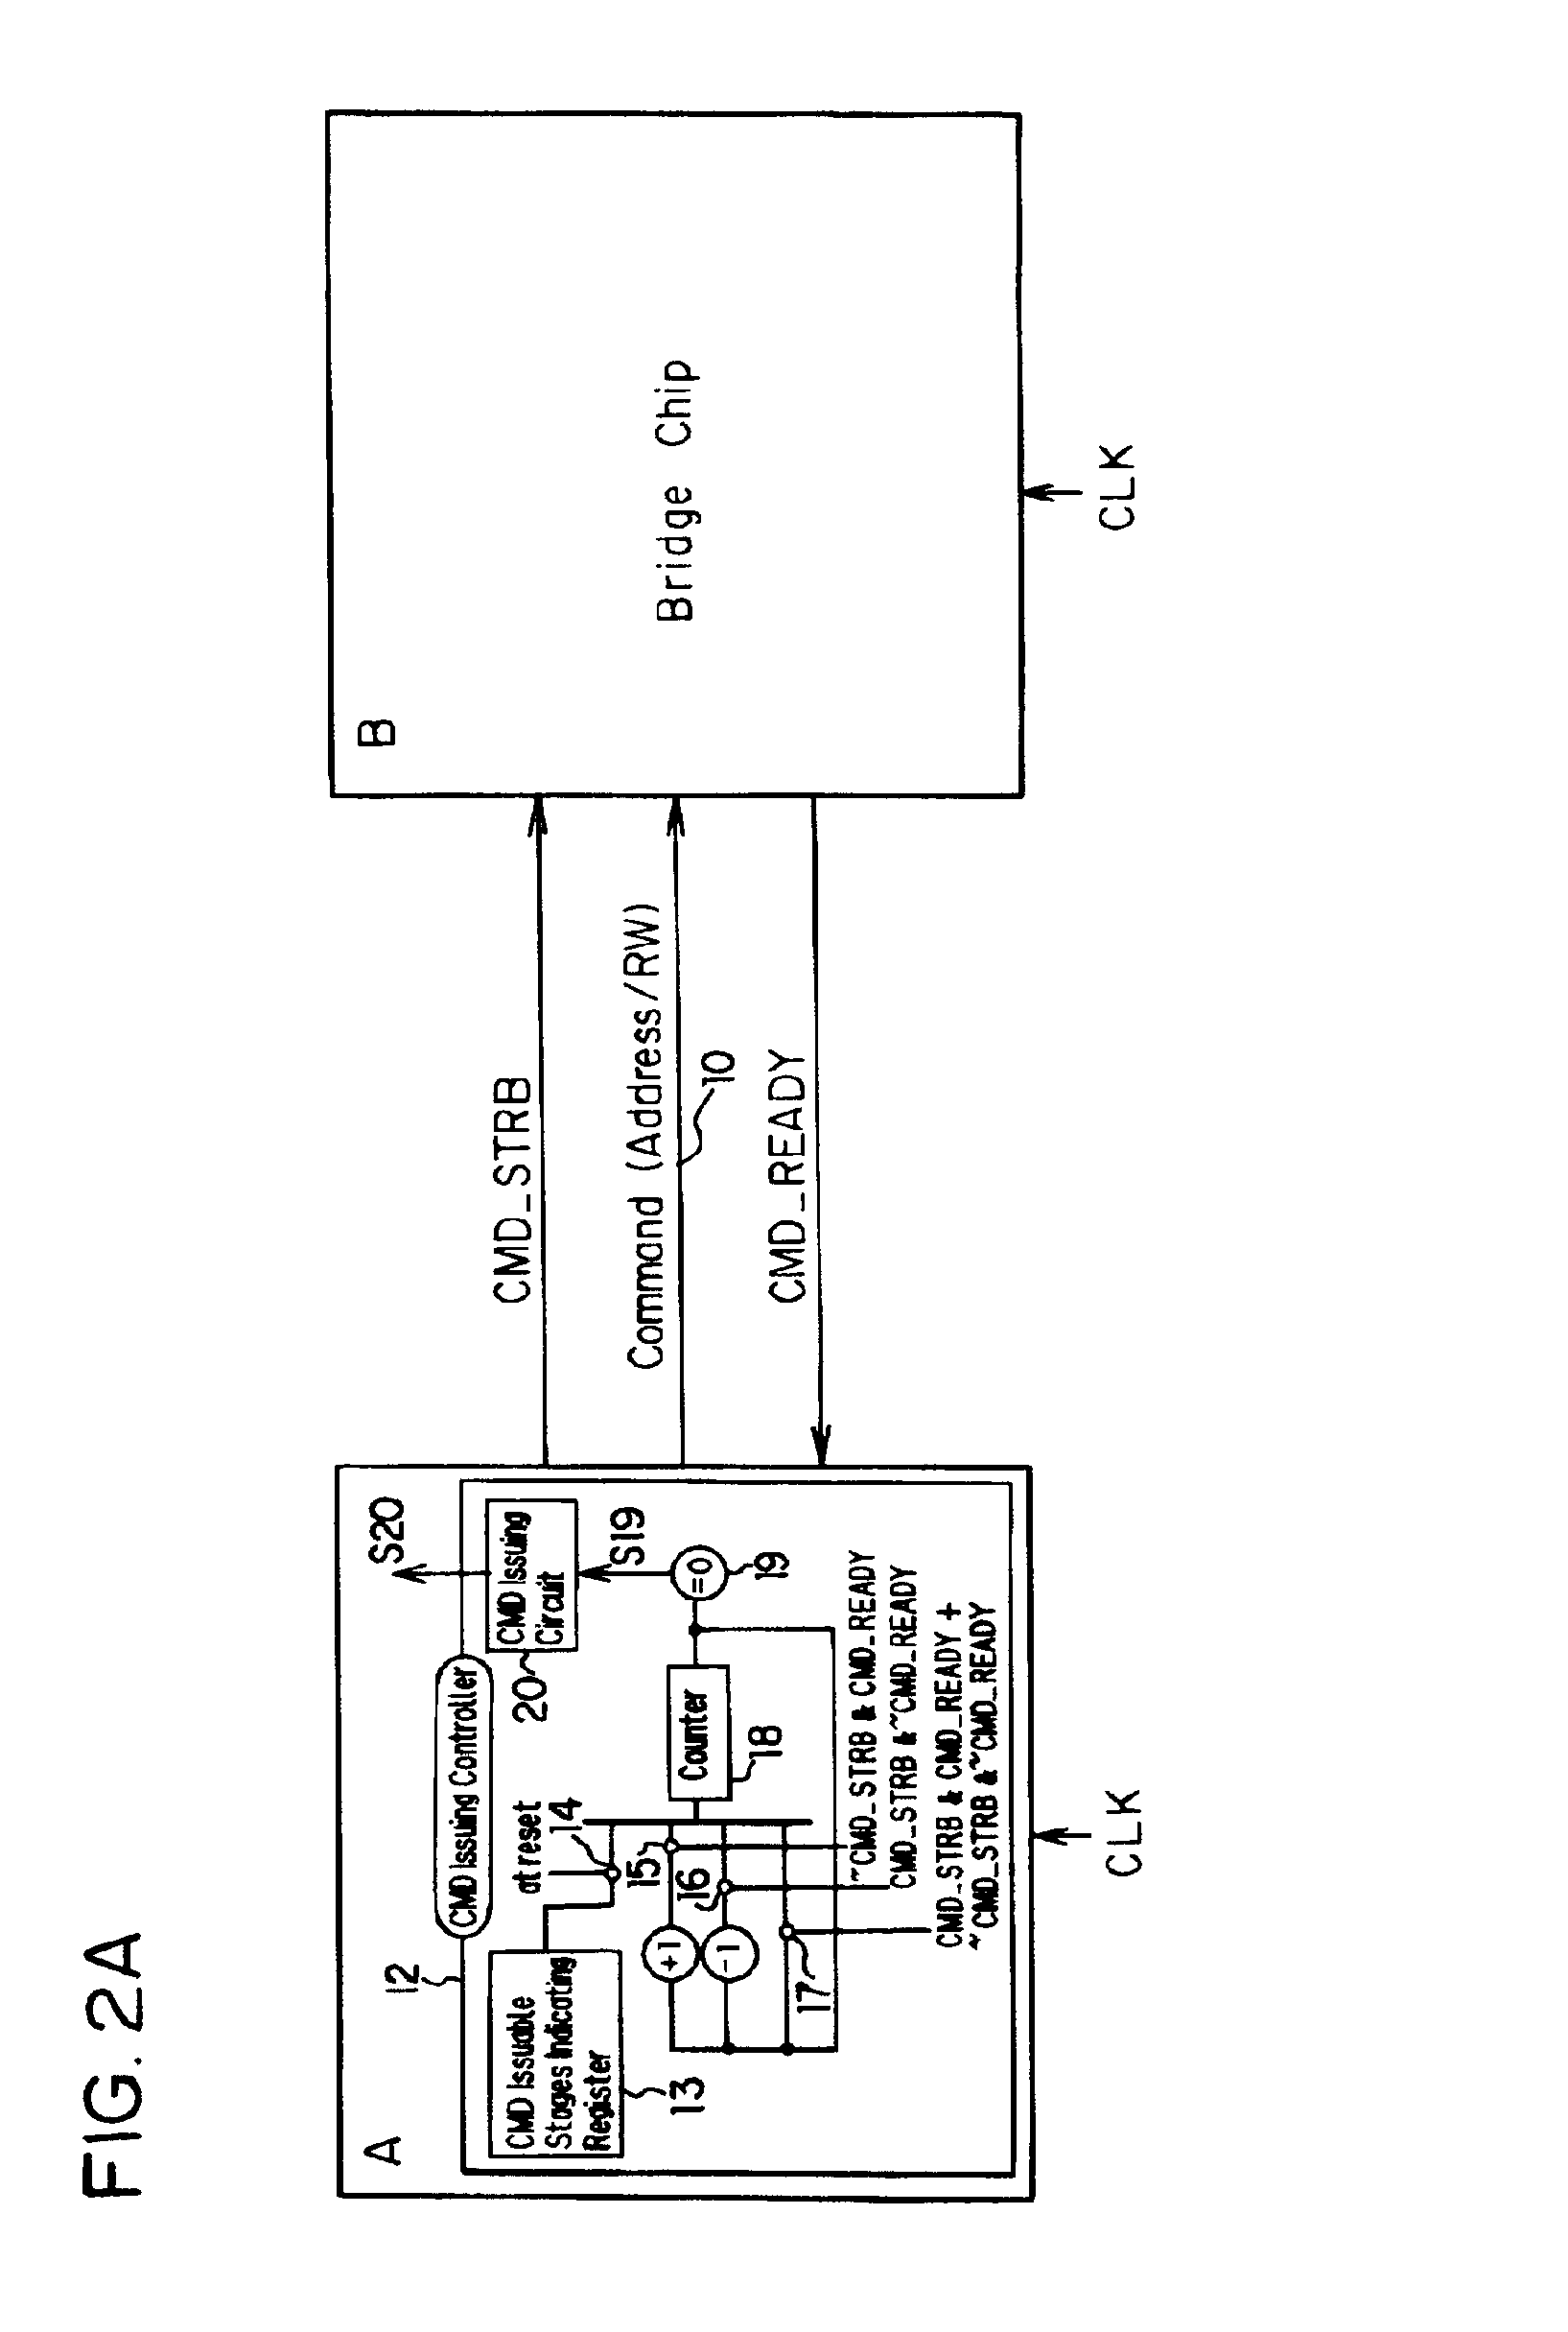 Bus control system for integrated circuit device with improved bus access efficiency